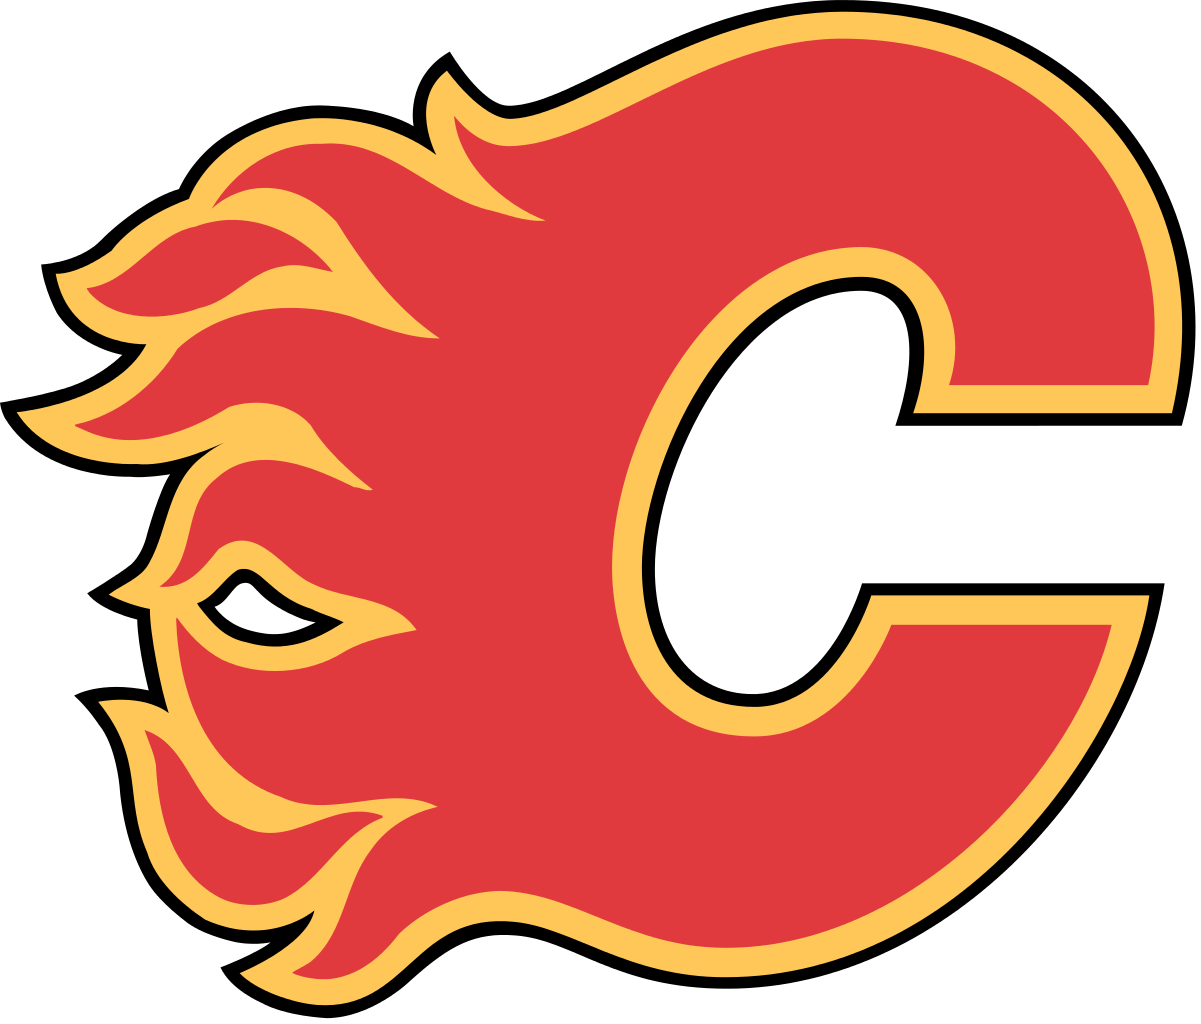 File:Calgary Flames Logo.svg - Wikipedia, the free encyclopedia - ClipArt  Best - ClipArt Best